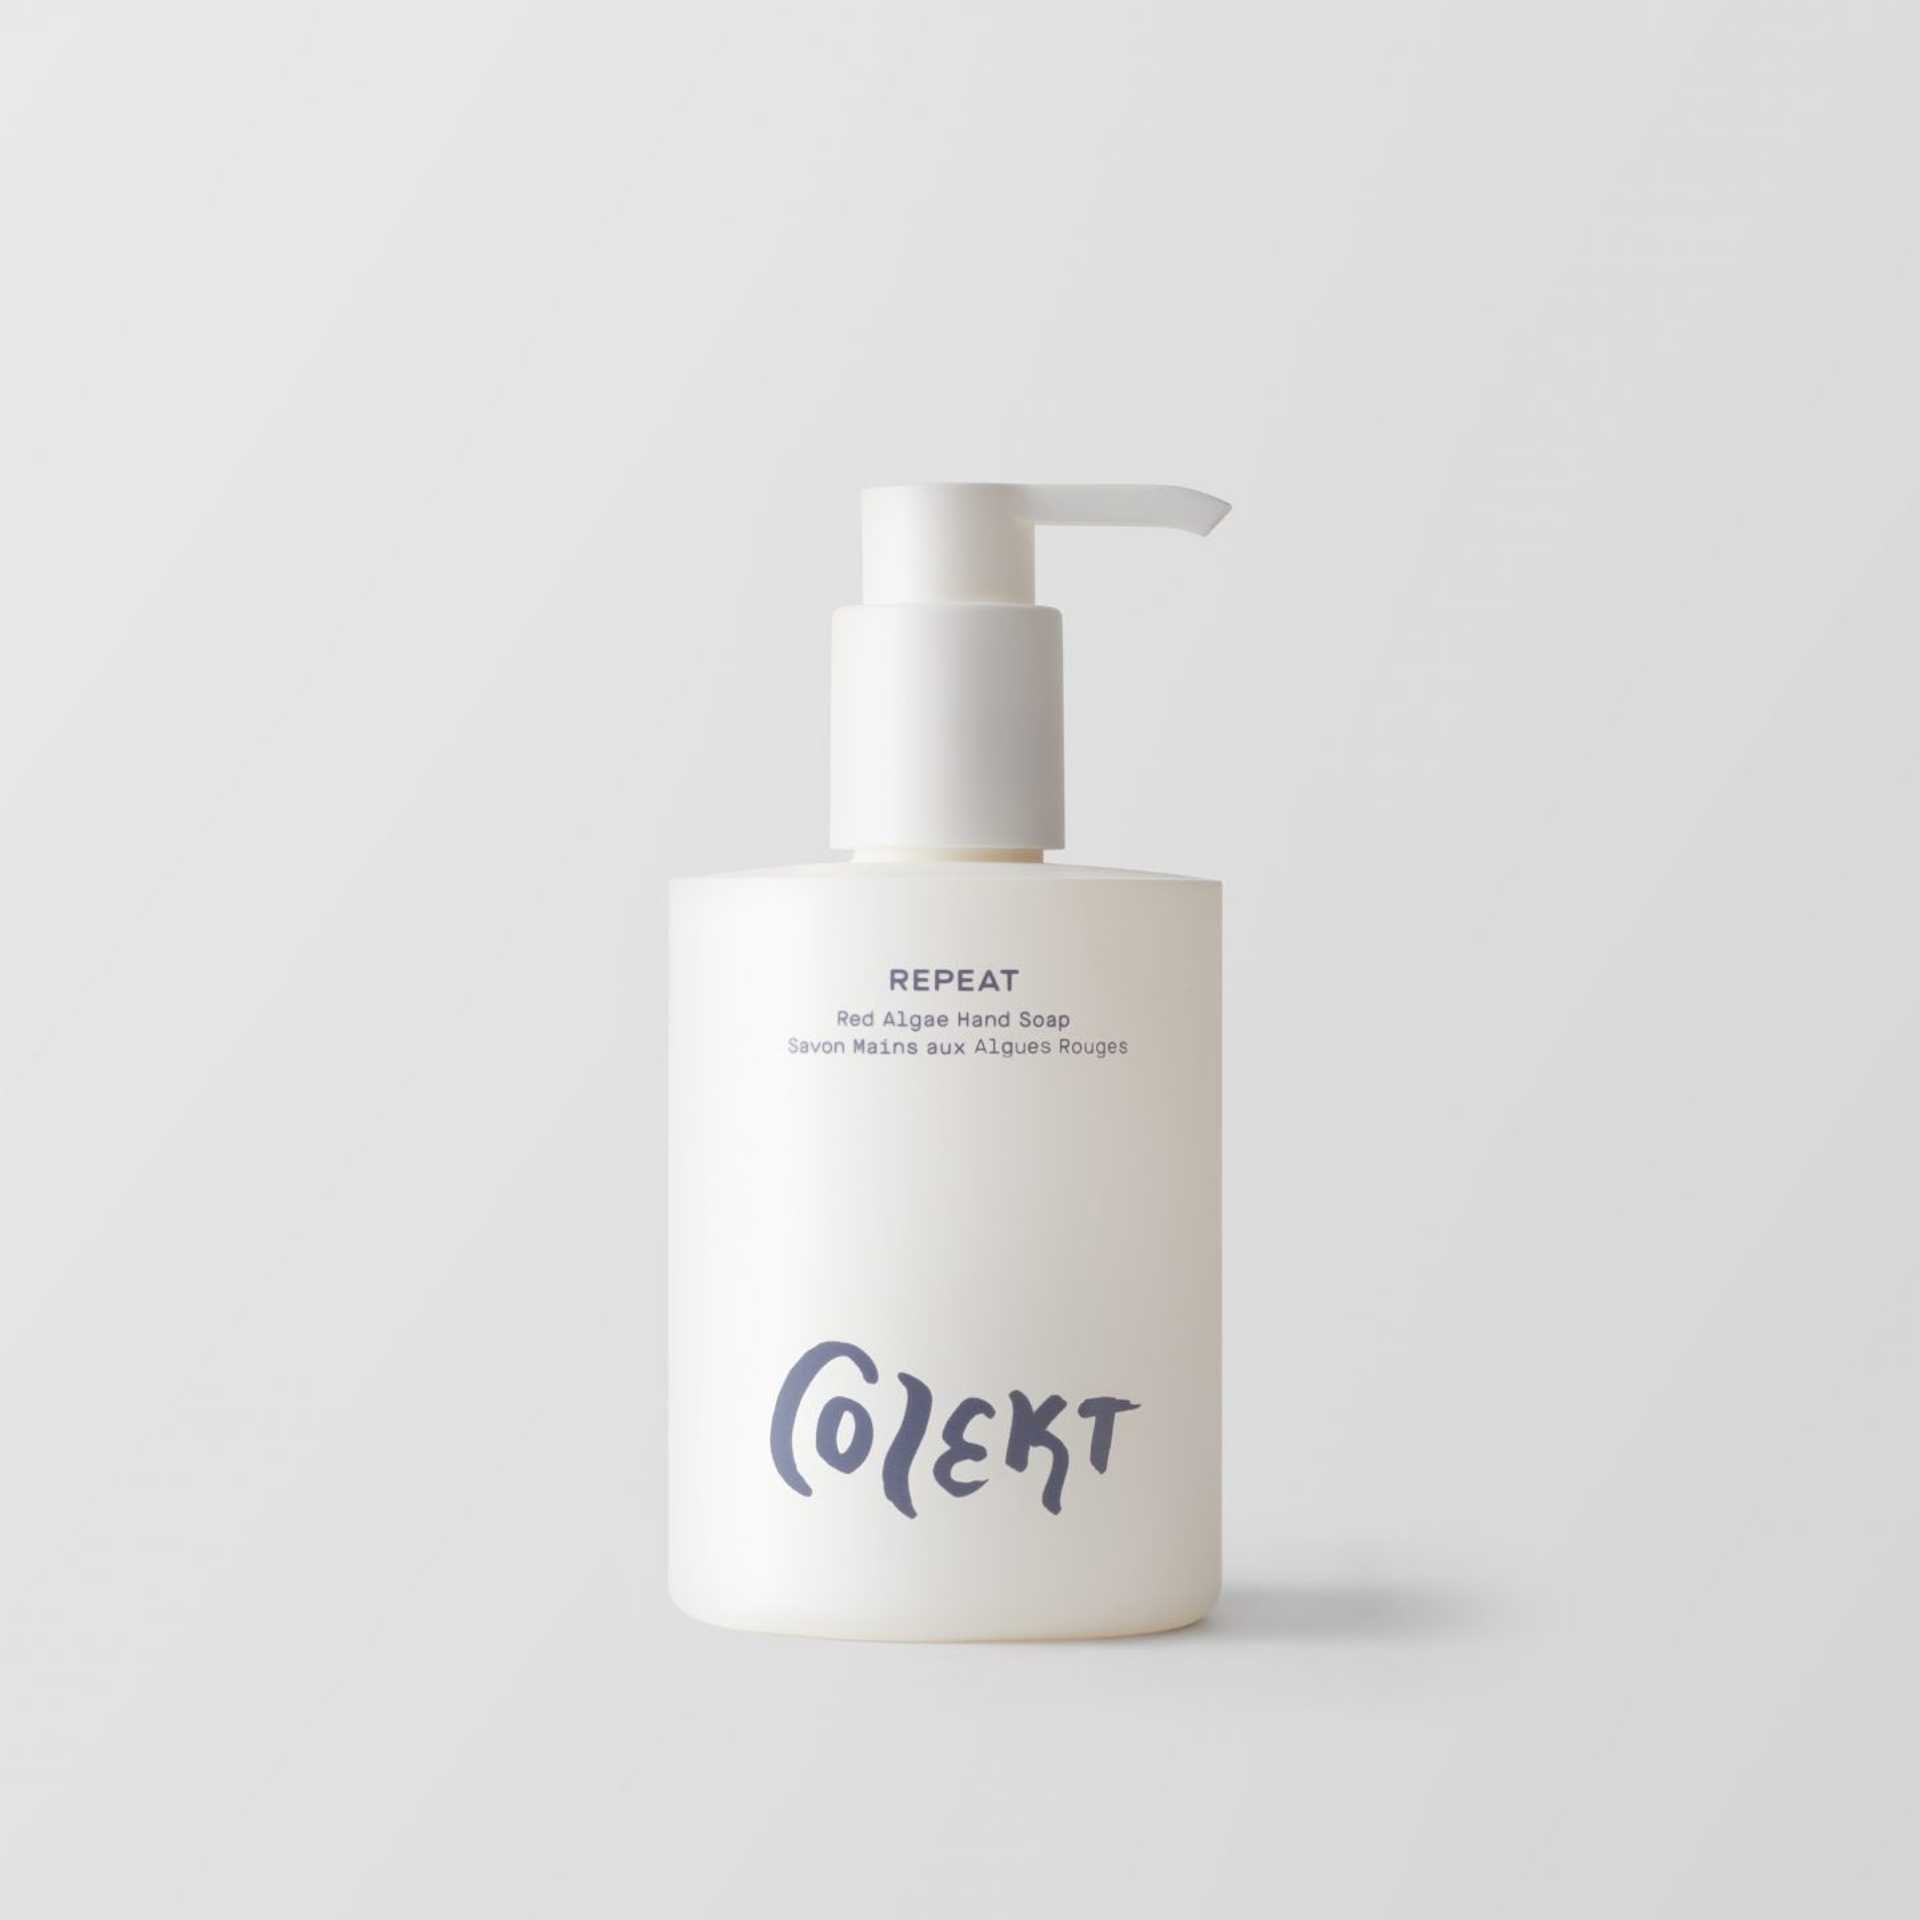 Product Image of REPEAT